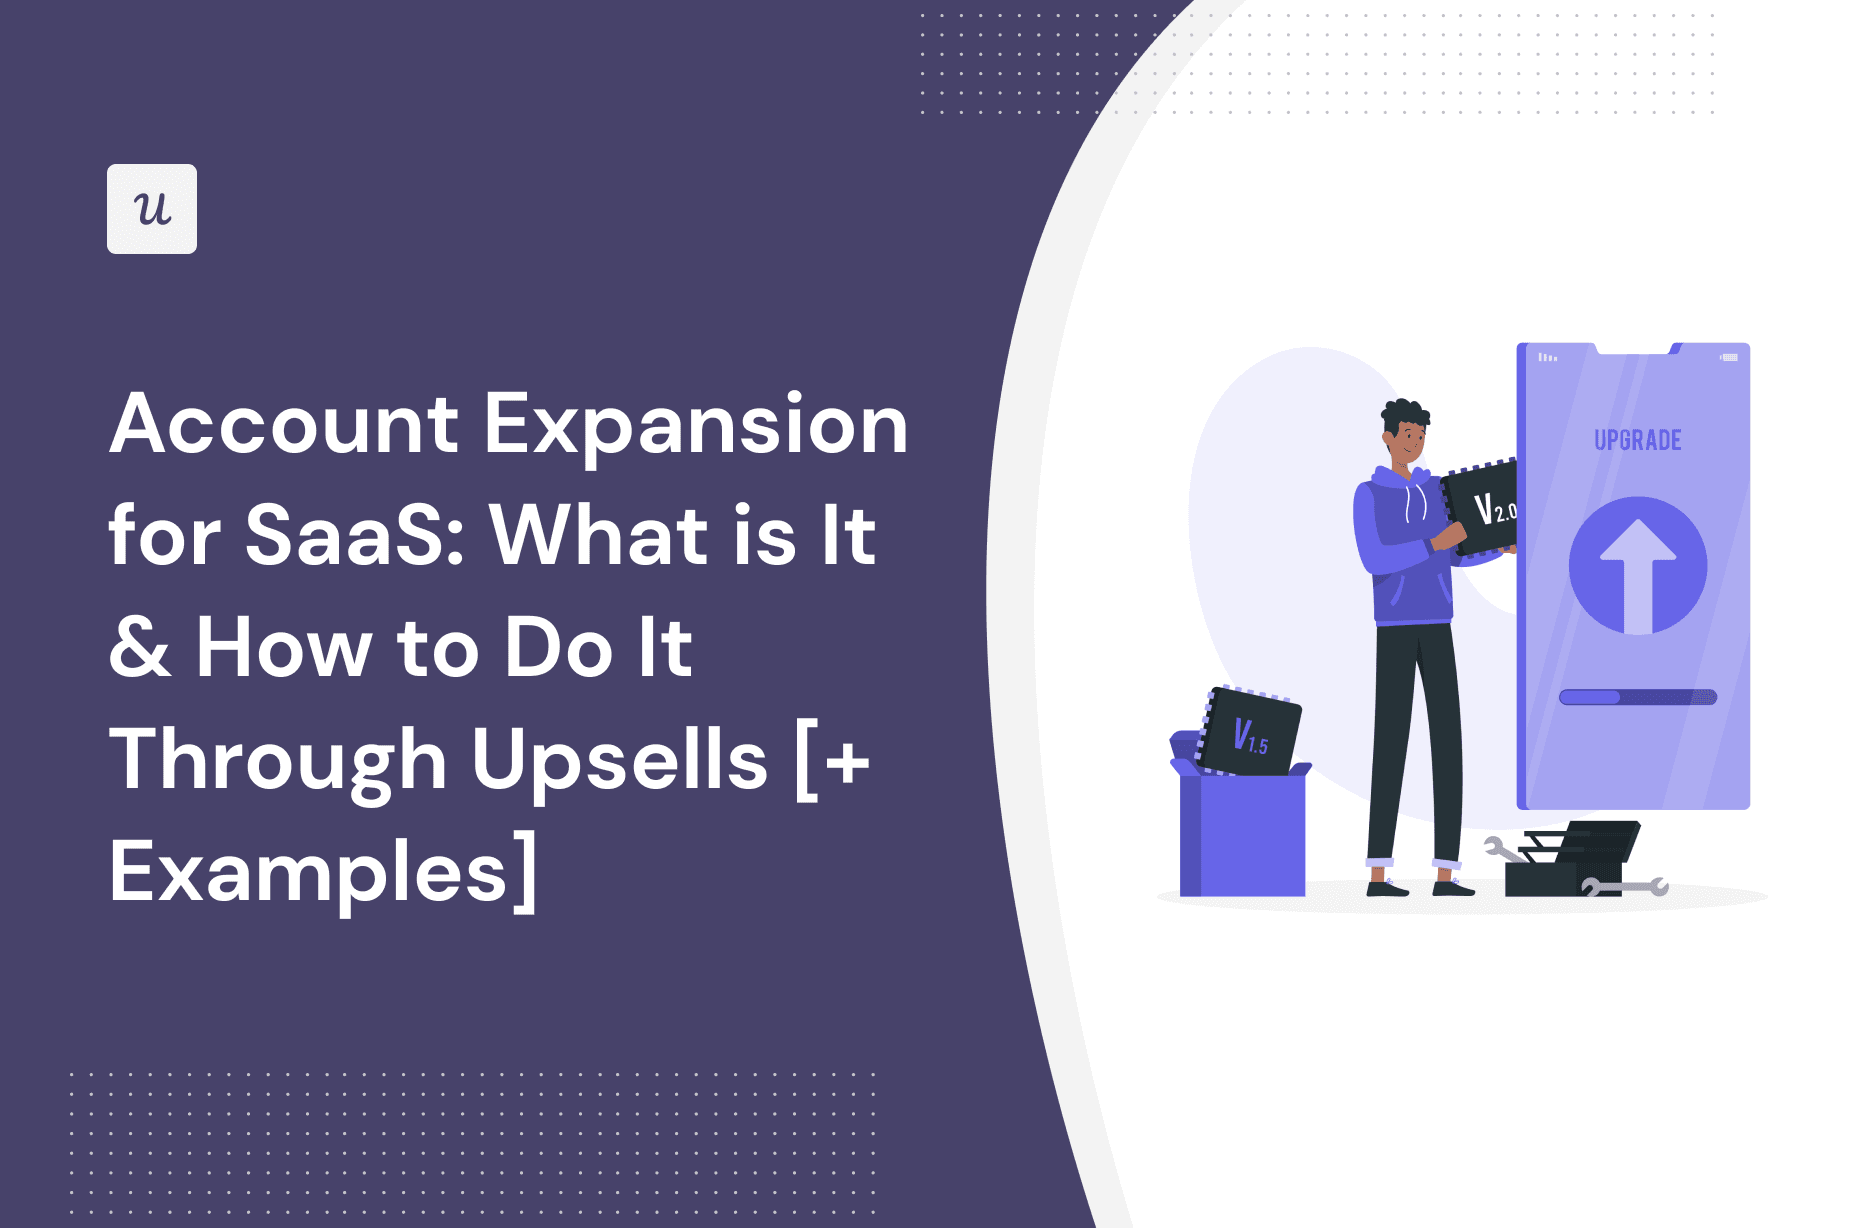 Account Expansion for SaaS: What is It & How to Do It Through Upsells [+ Examples] cover